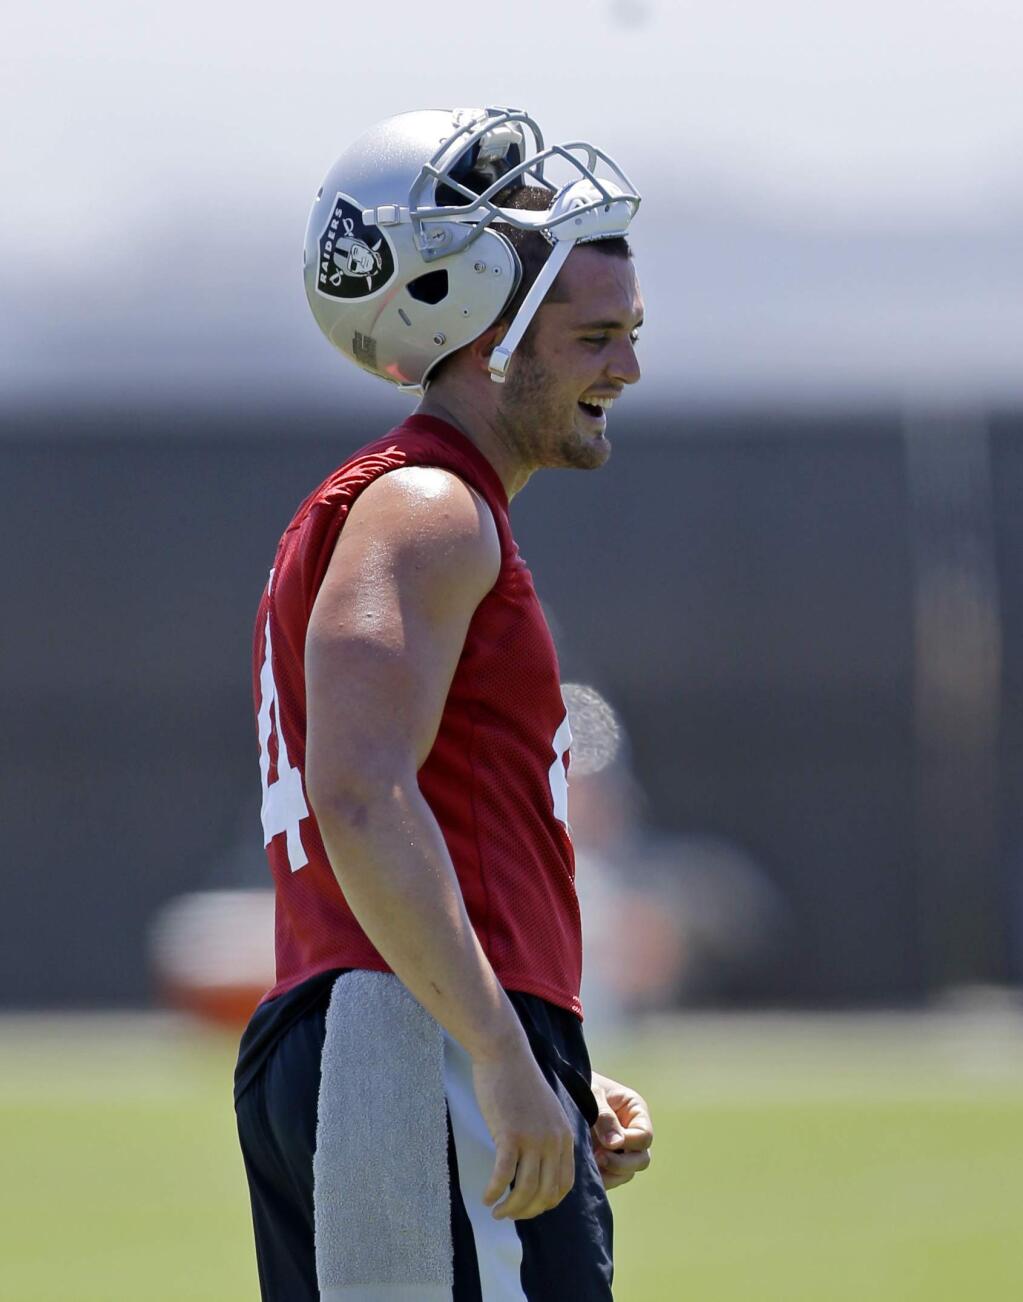 Oakland Raiders quarterback Derek Carr laughs during a break in practice on Tuesday, June 13, 2017, at the team's training facility in Alameda. (AP Photo/Ben Margot)